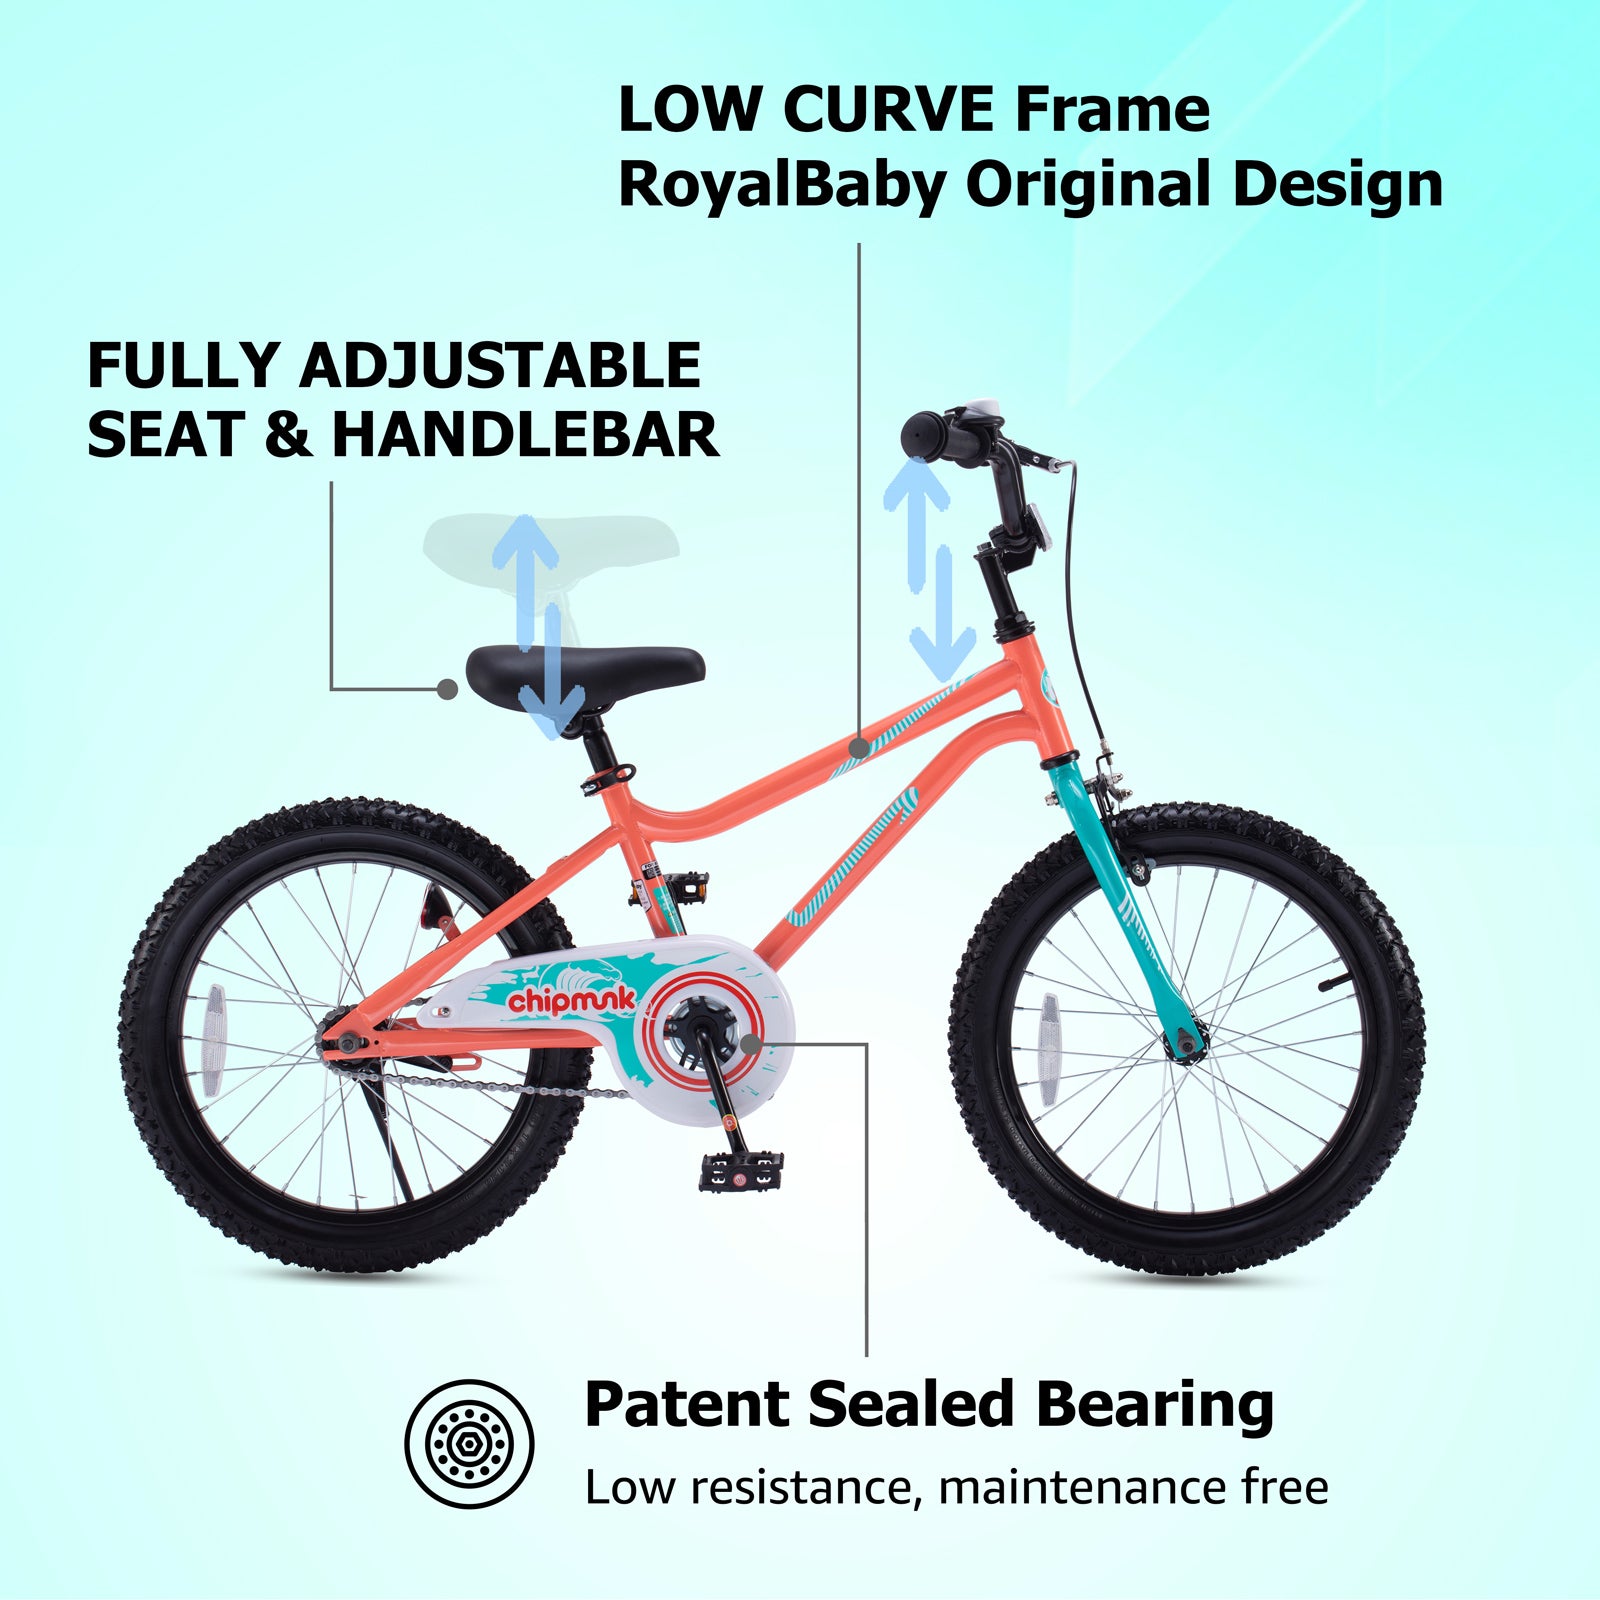 RoyalBaby Chipmunk Kids Bike Boys Girls 14 16 18 Inch Bicycle for Ages 4-9 Years, Training Wheels Options, Multiple Colors